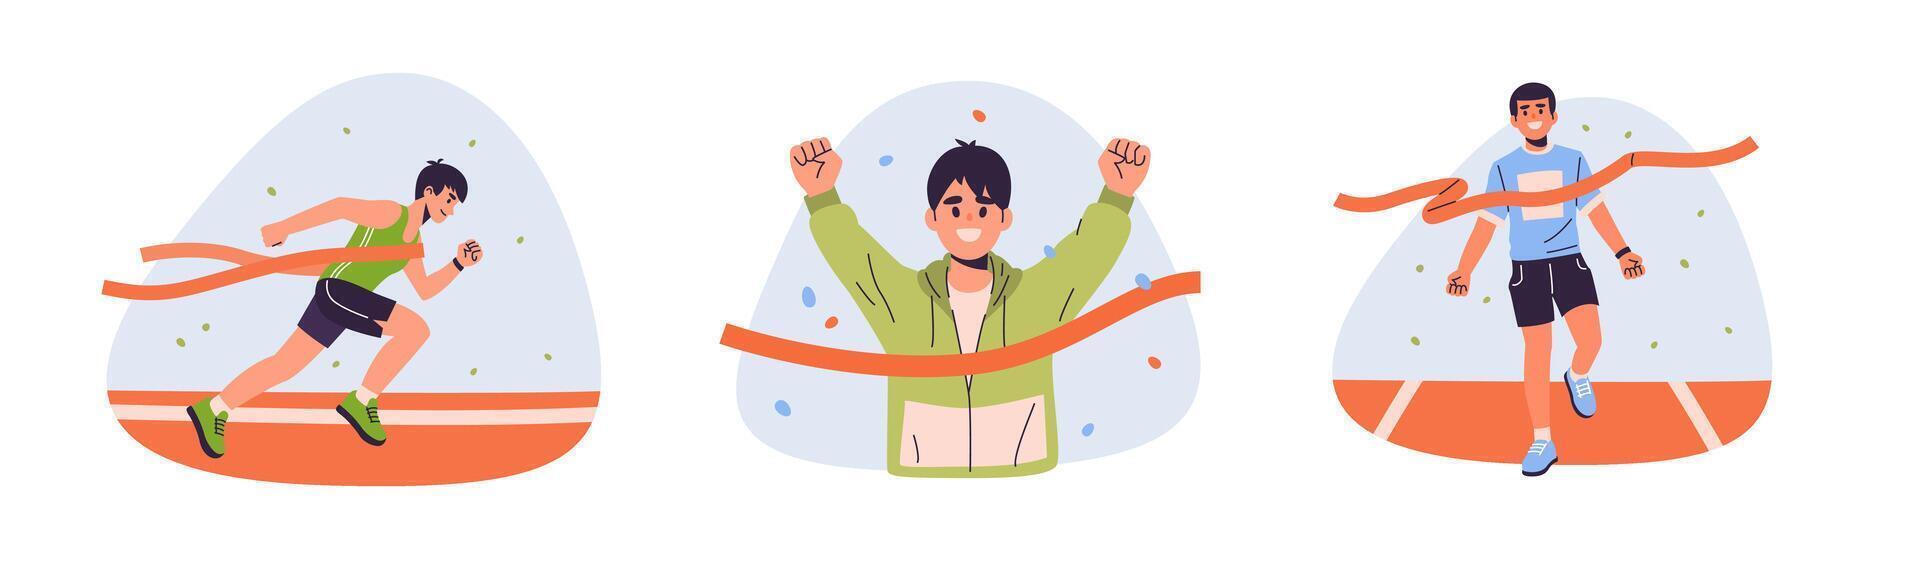 Marathon runners crossing finish line. Illustrations of male athletes celebrating victory. Sports competition and personal achievement concept. Flat design style. vector